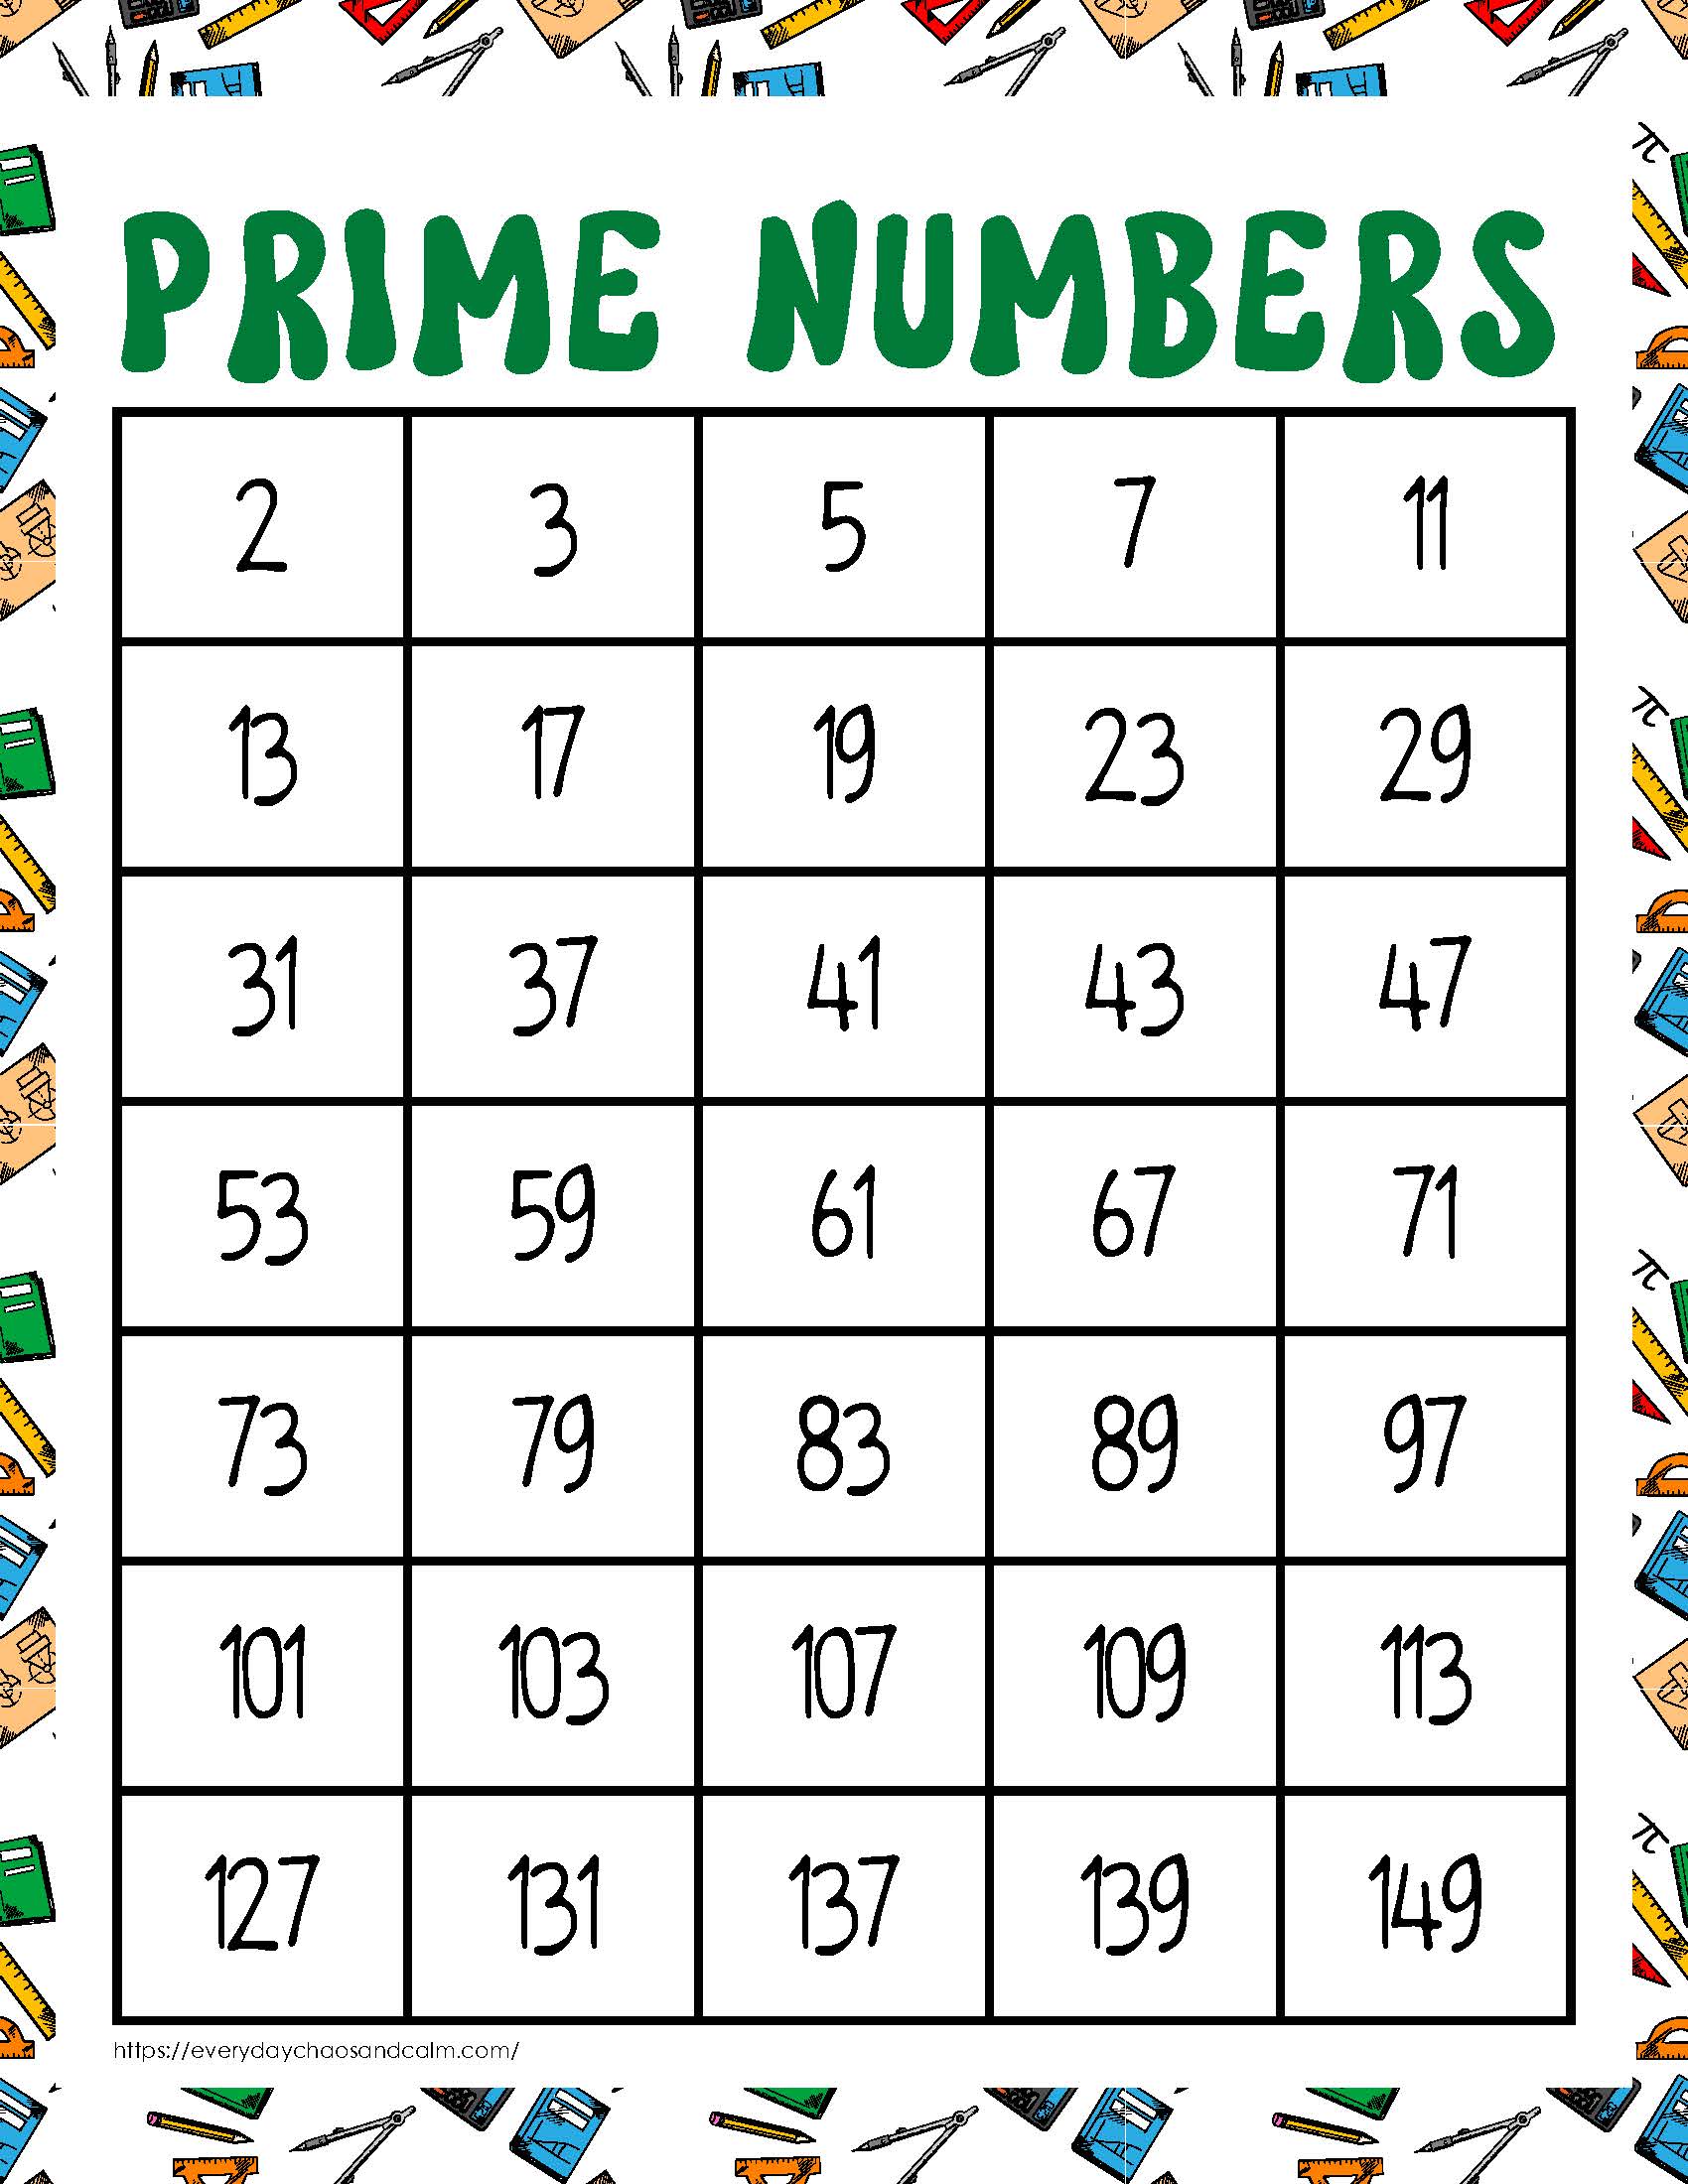 printable prime number charts, PDF, instant download, elementary, educational tool